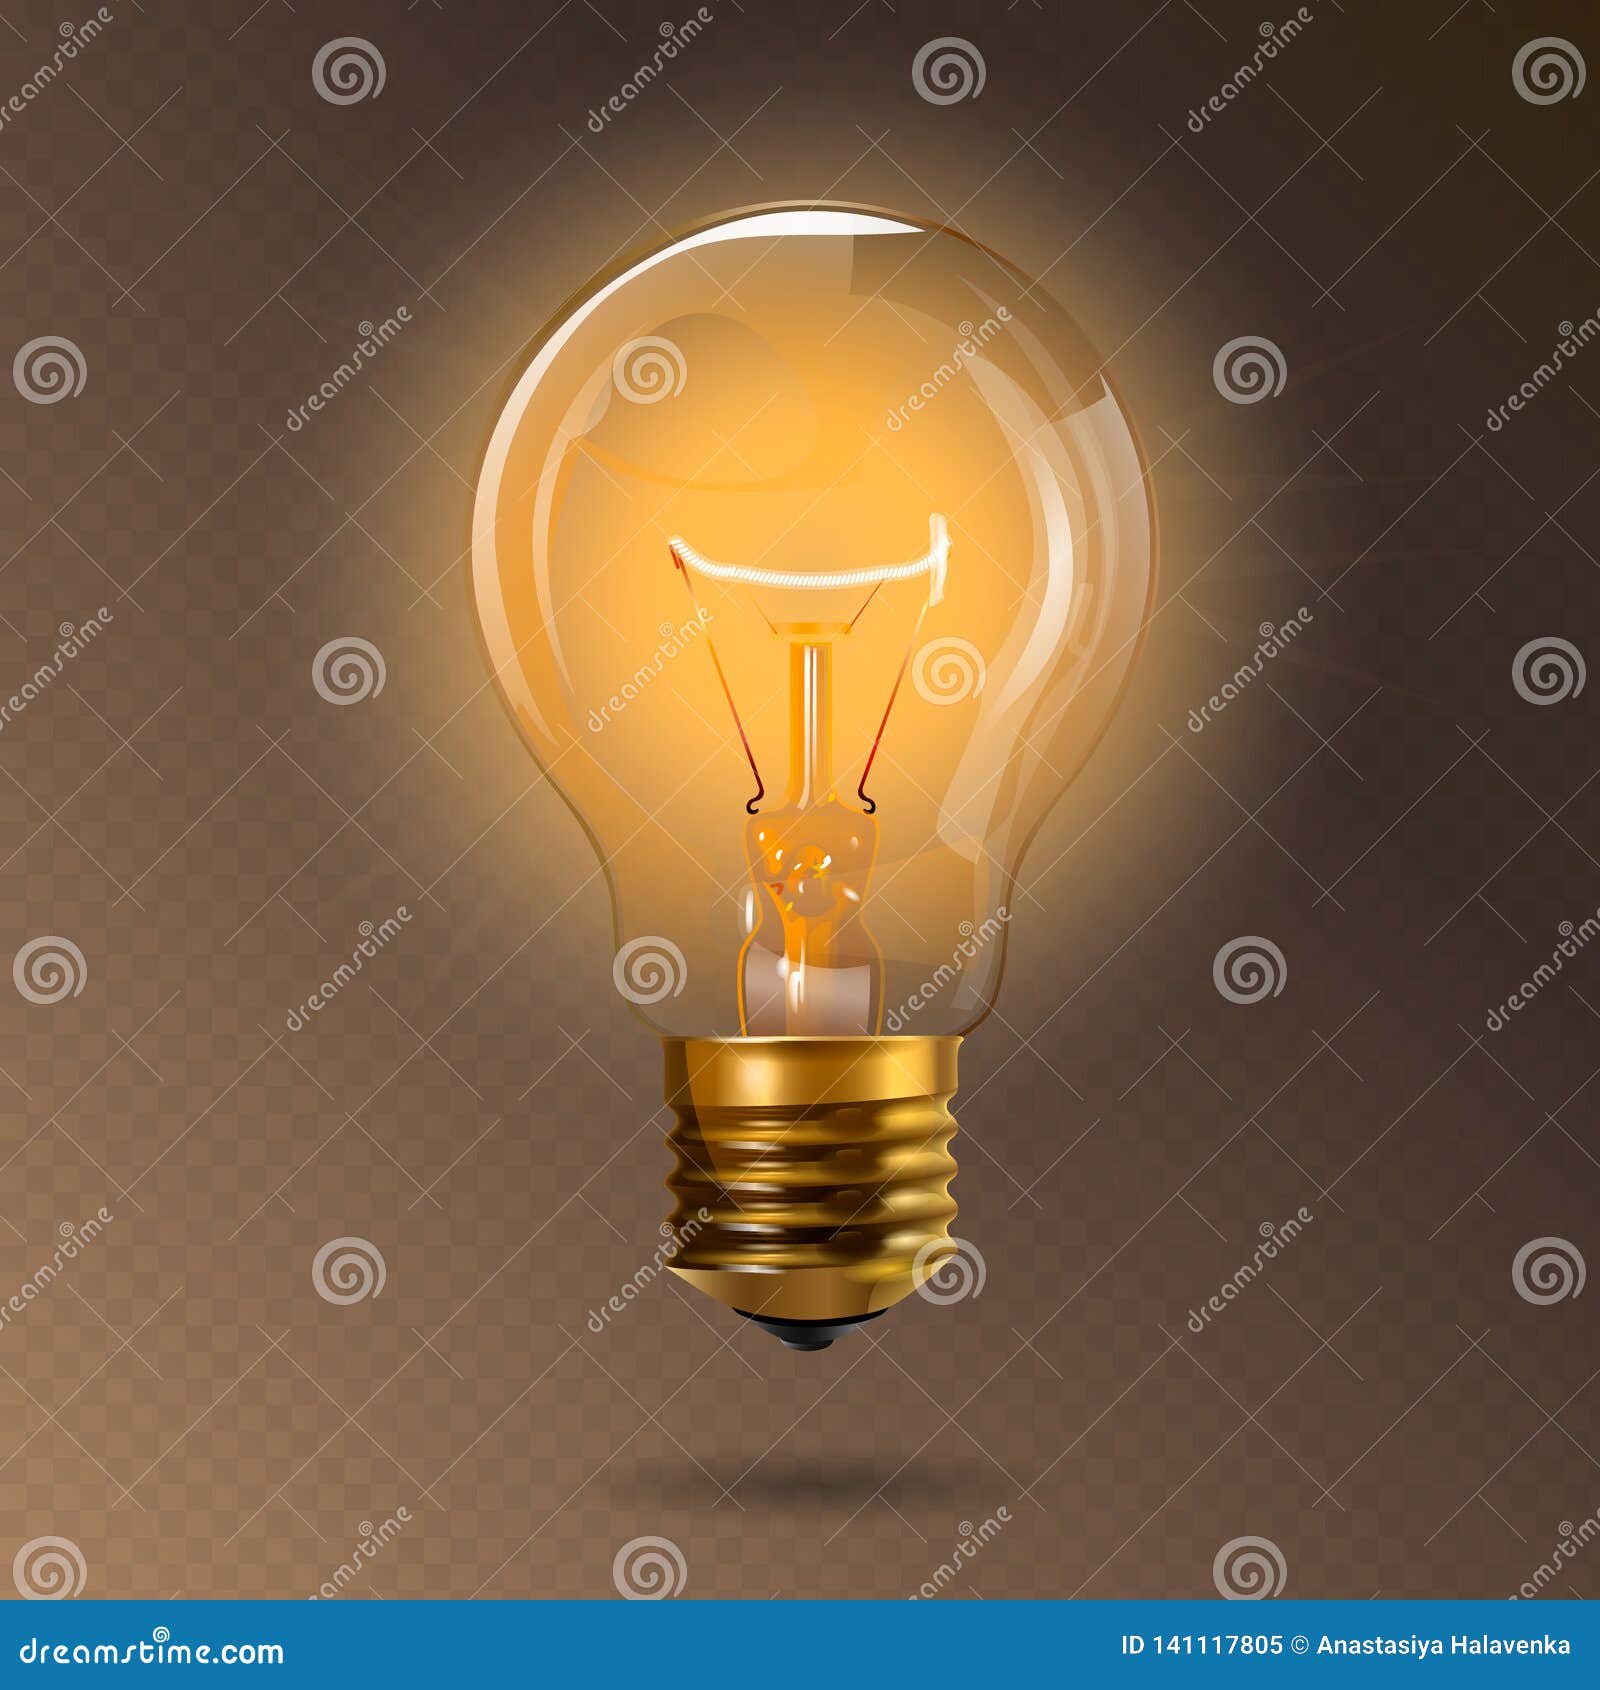 sindsyg Bliv Samarbejde Transparent Glowing Electric Light Bulb with a Gold Base. Realistic Style  Stock Vector - Illustration of creative, eureka: 141117805